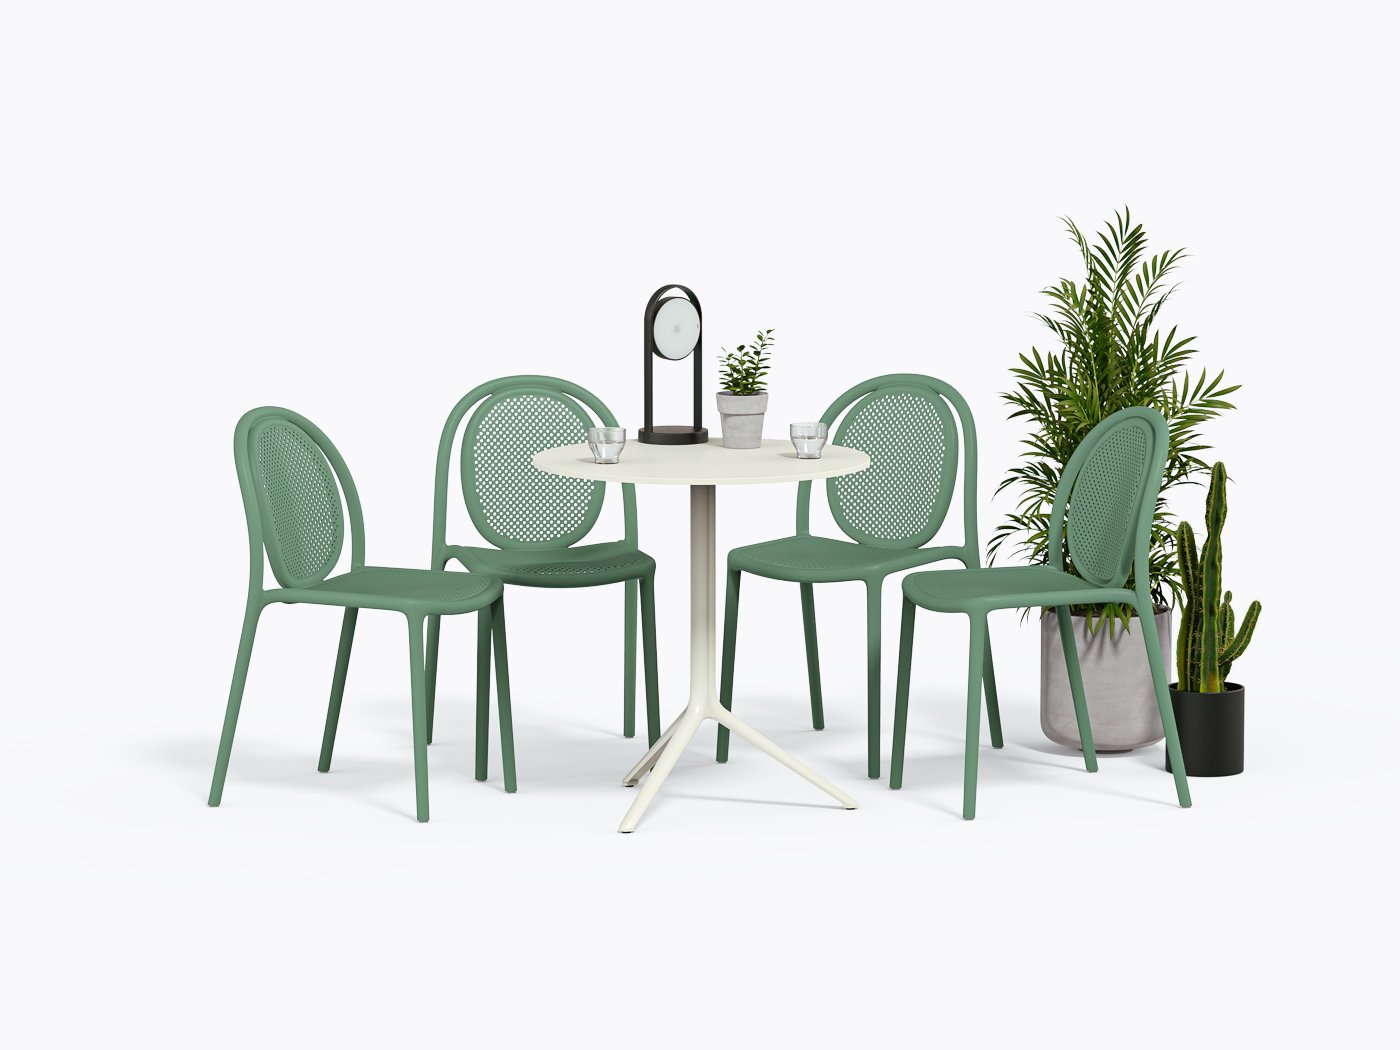 Remind Bundle - 4 Chairs - Green VE